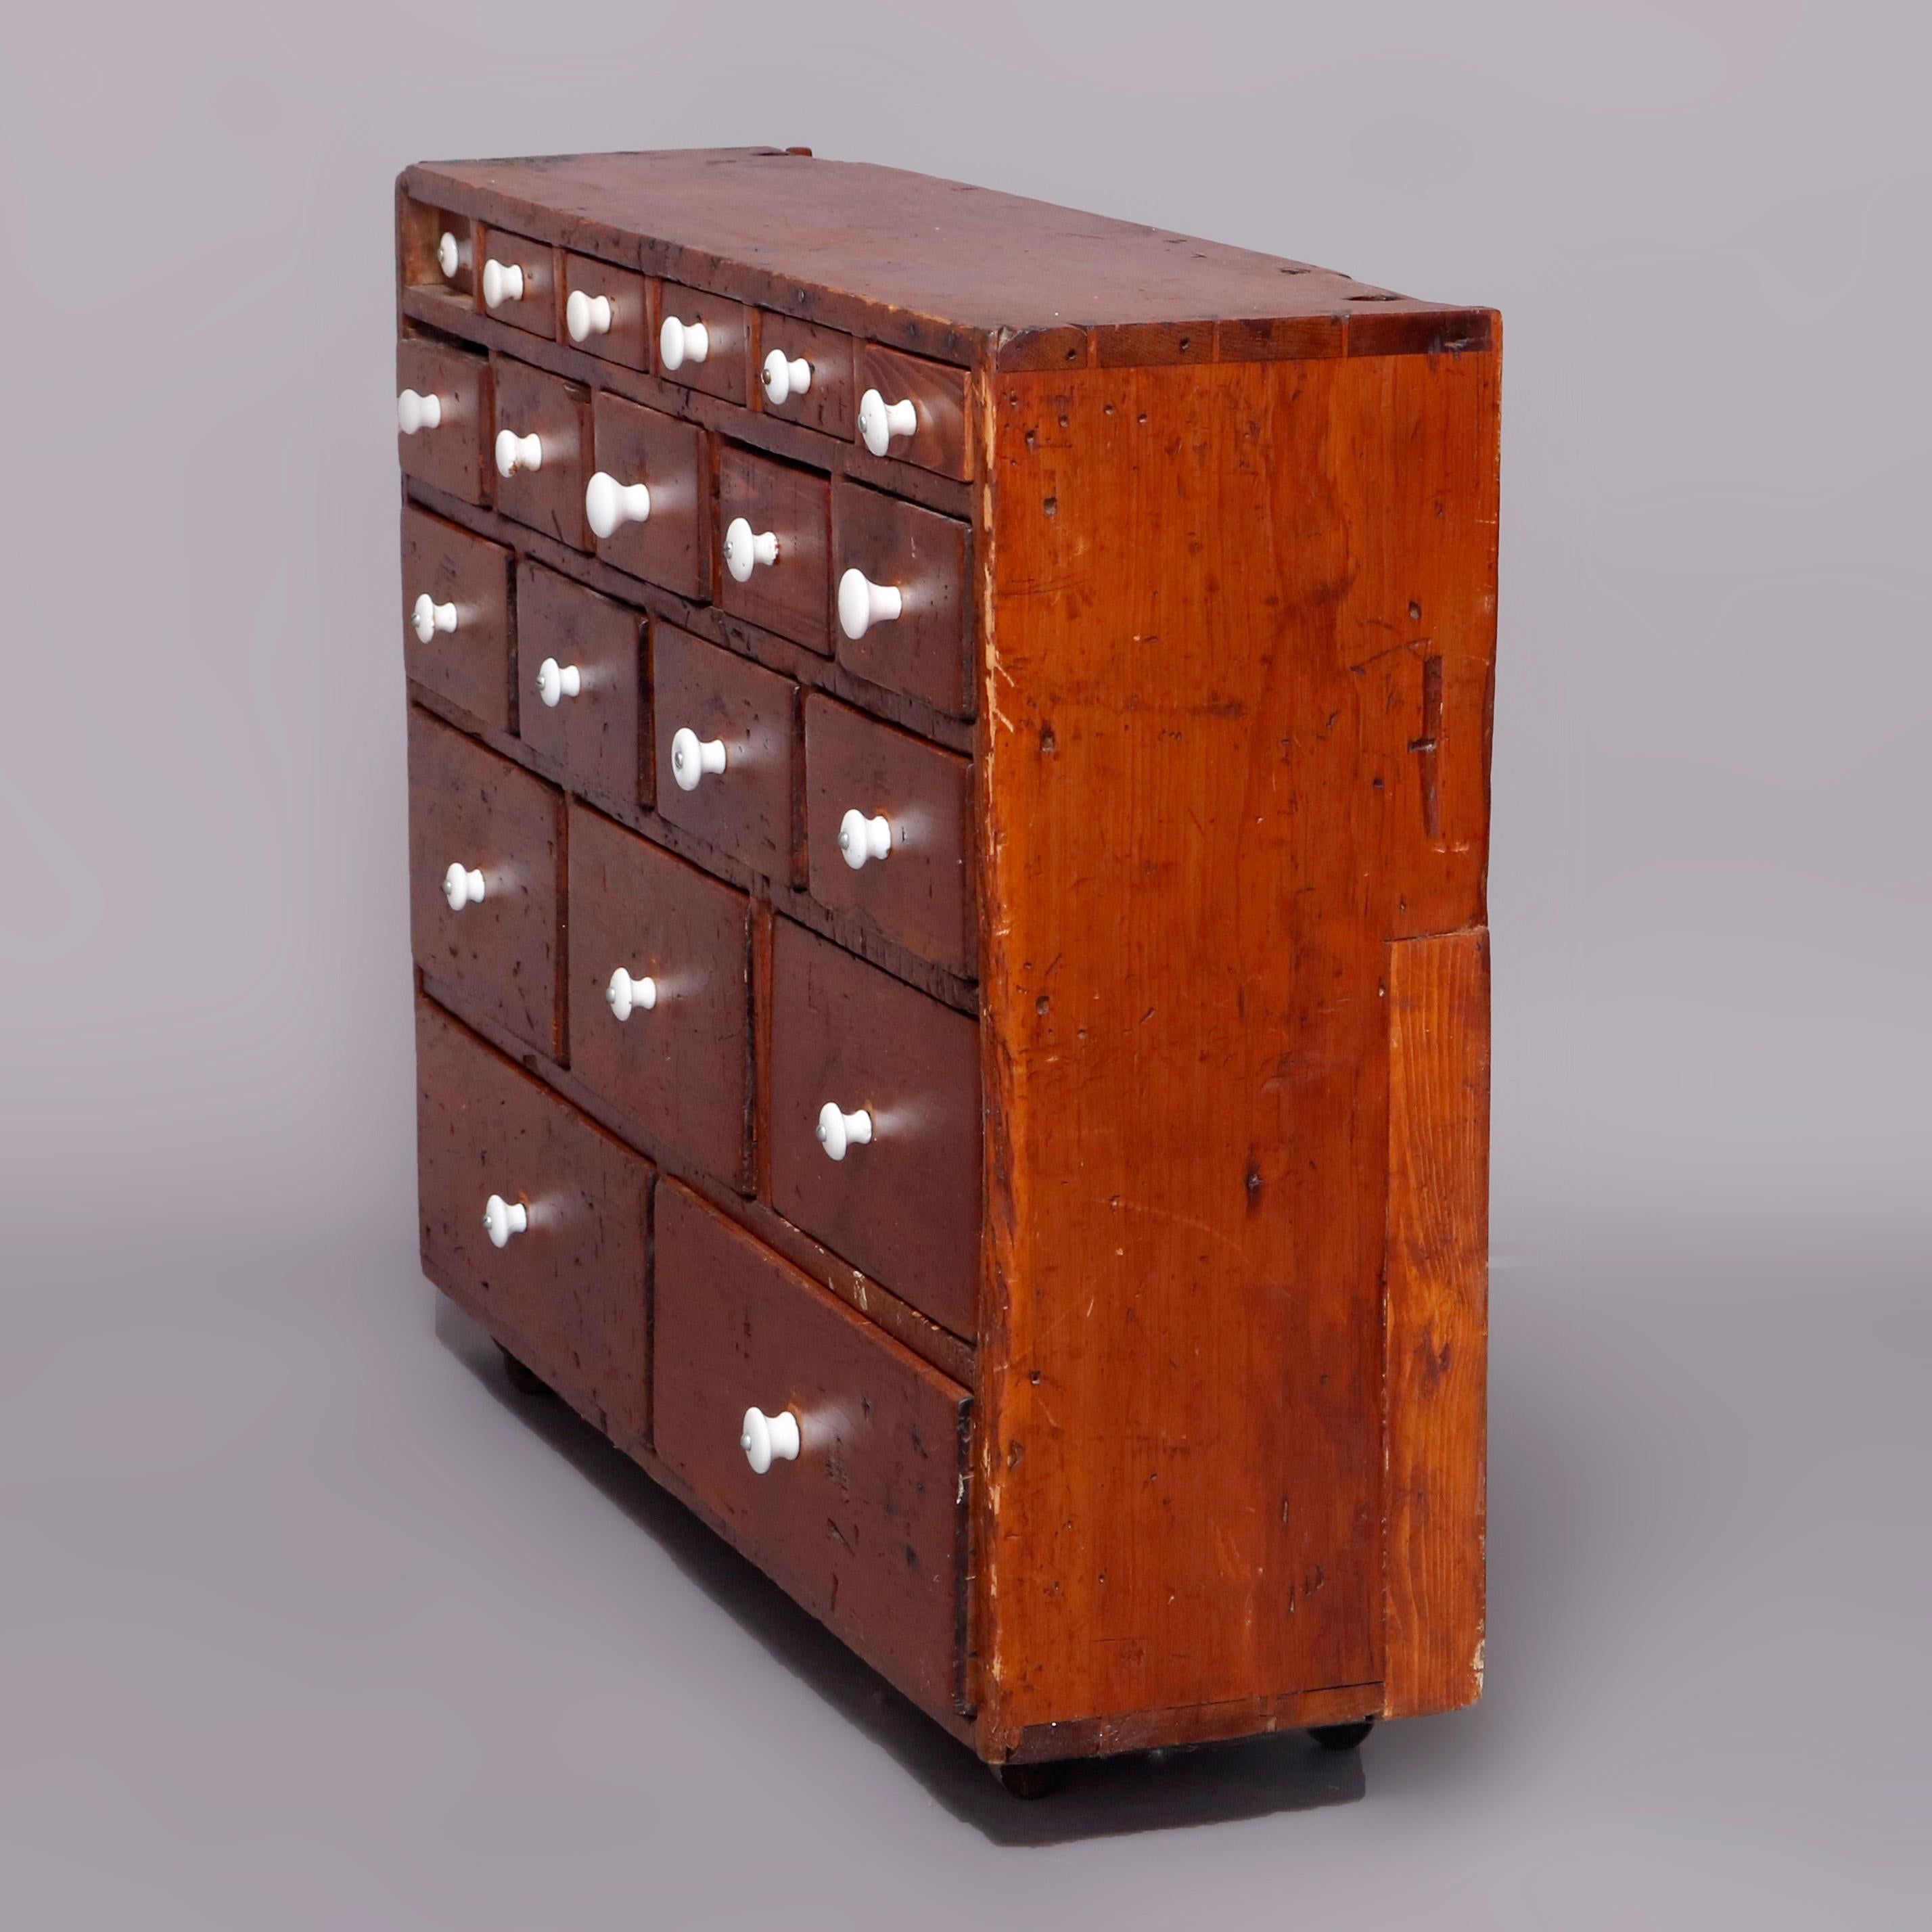 An antique primitive apothecary cabinet offers softwood construction having twenty graduated drawers with porcelain pulls and seaed on casters, 19th century

Measures: 28